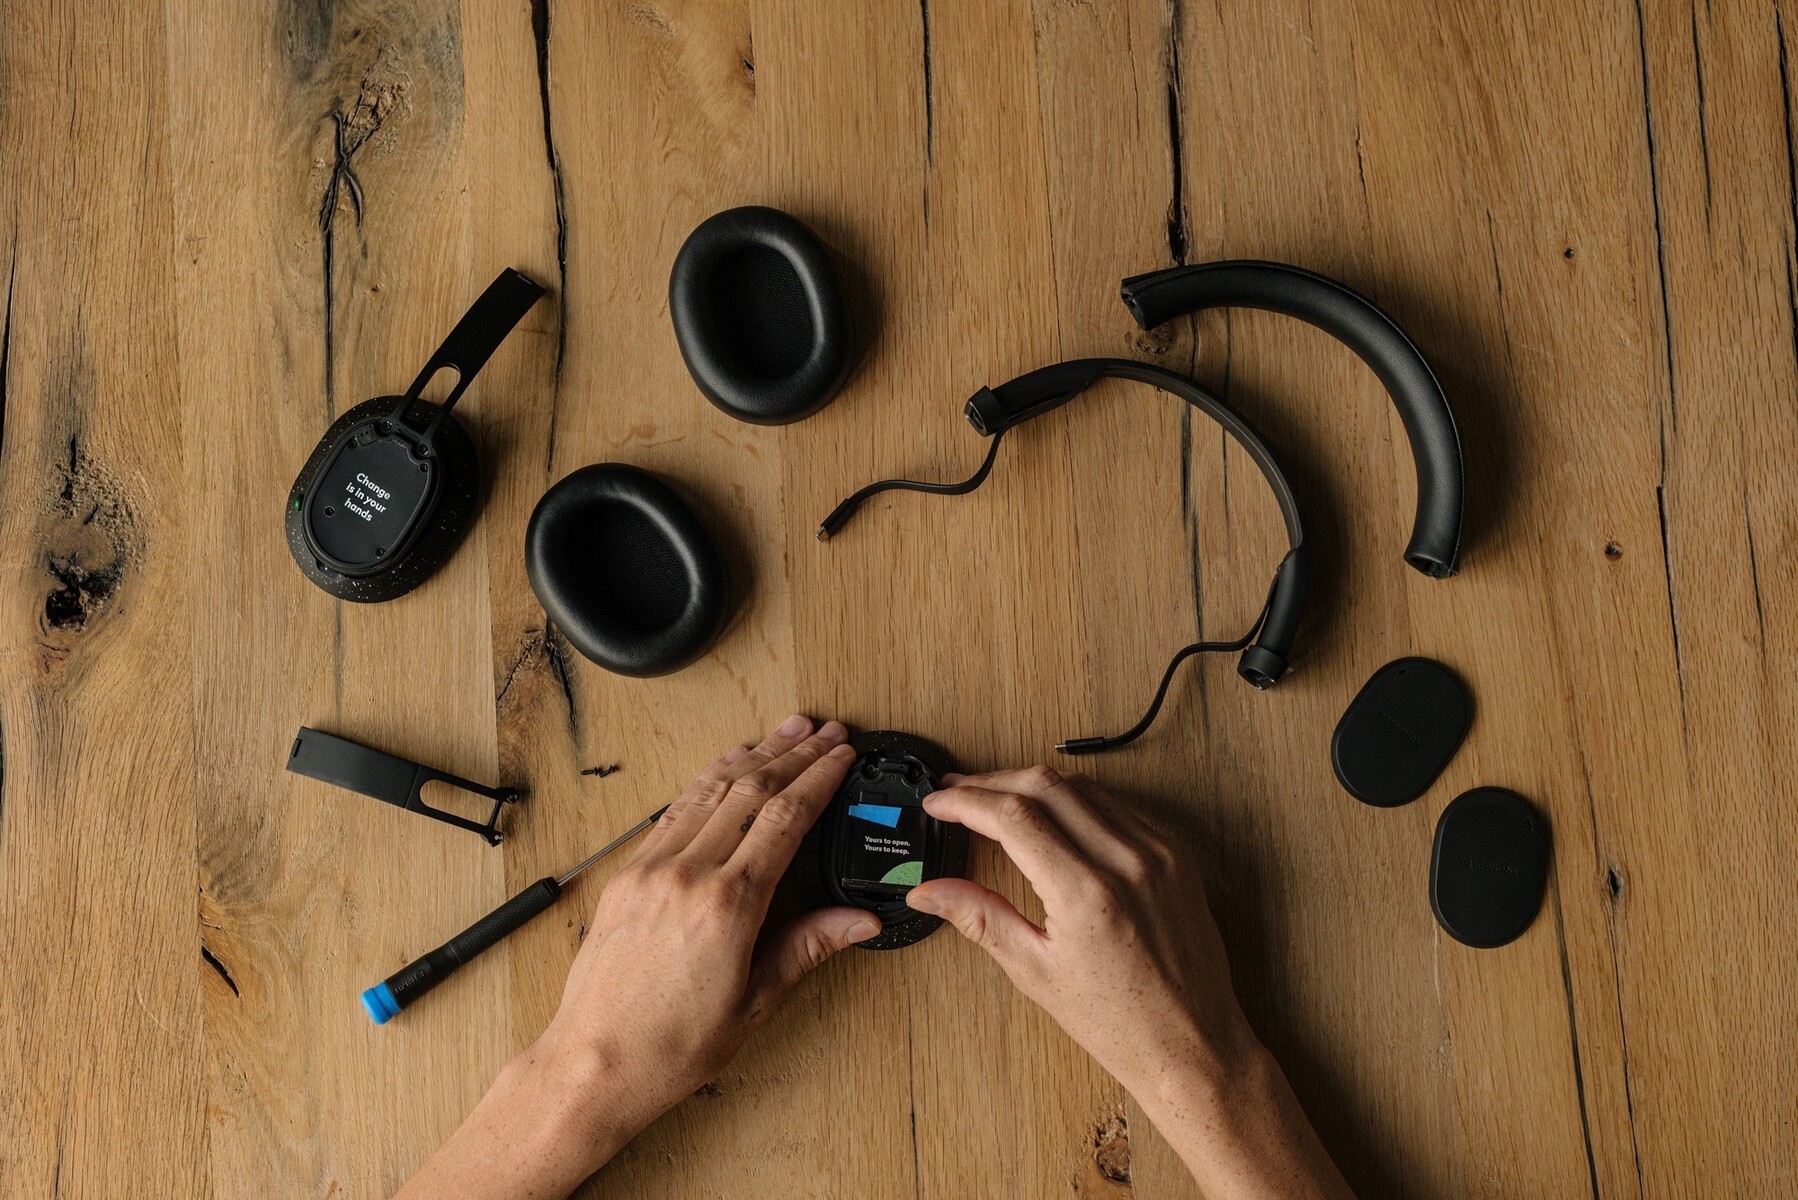 Fairphone debuts Fairbuds XL as new sustainable over-ear headphones with  premium features - NotebookCheck.net News